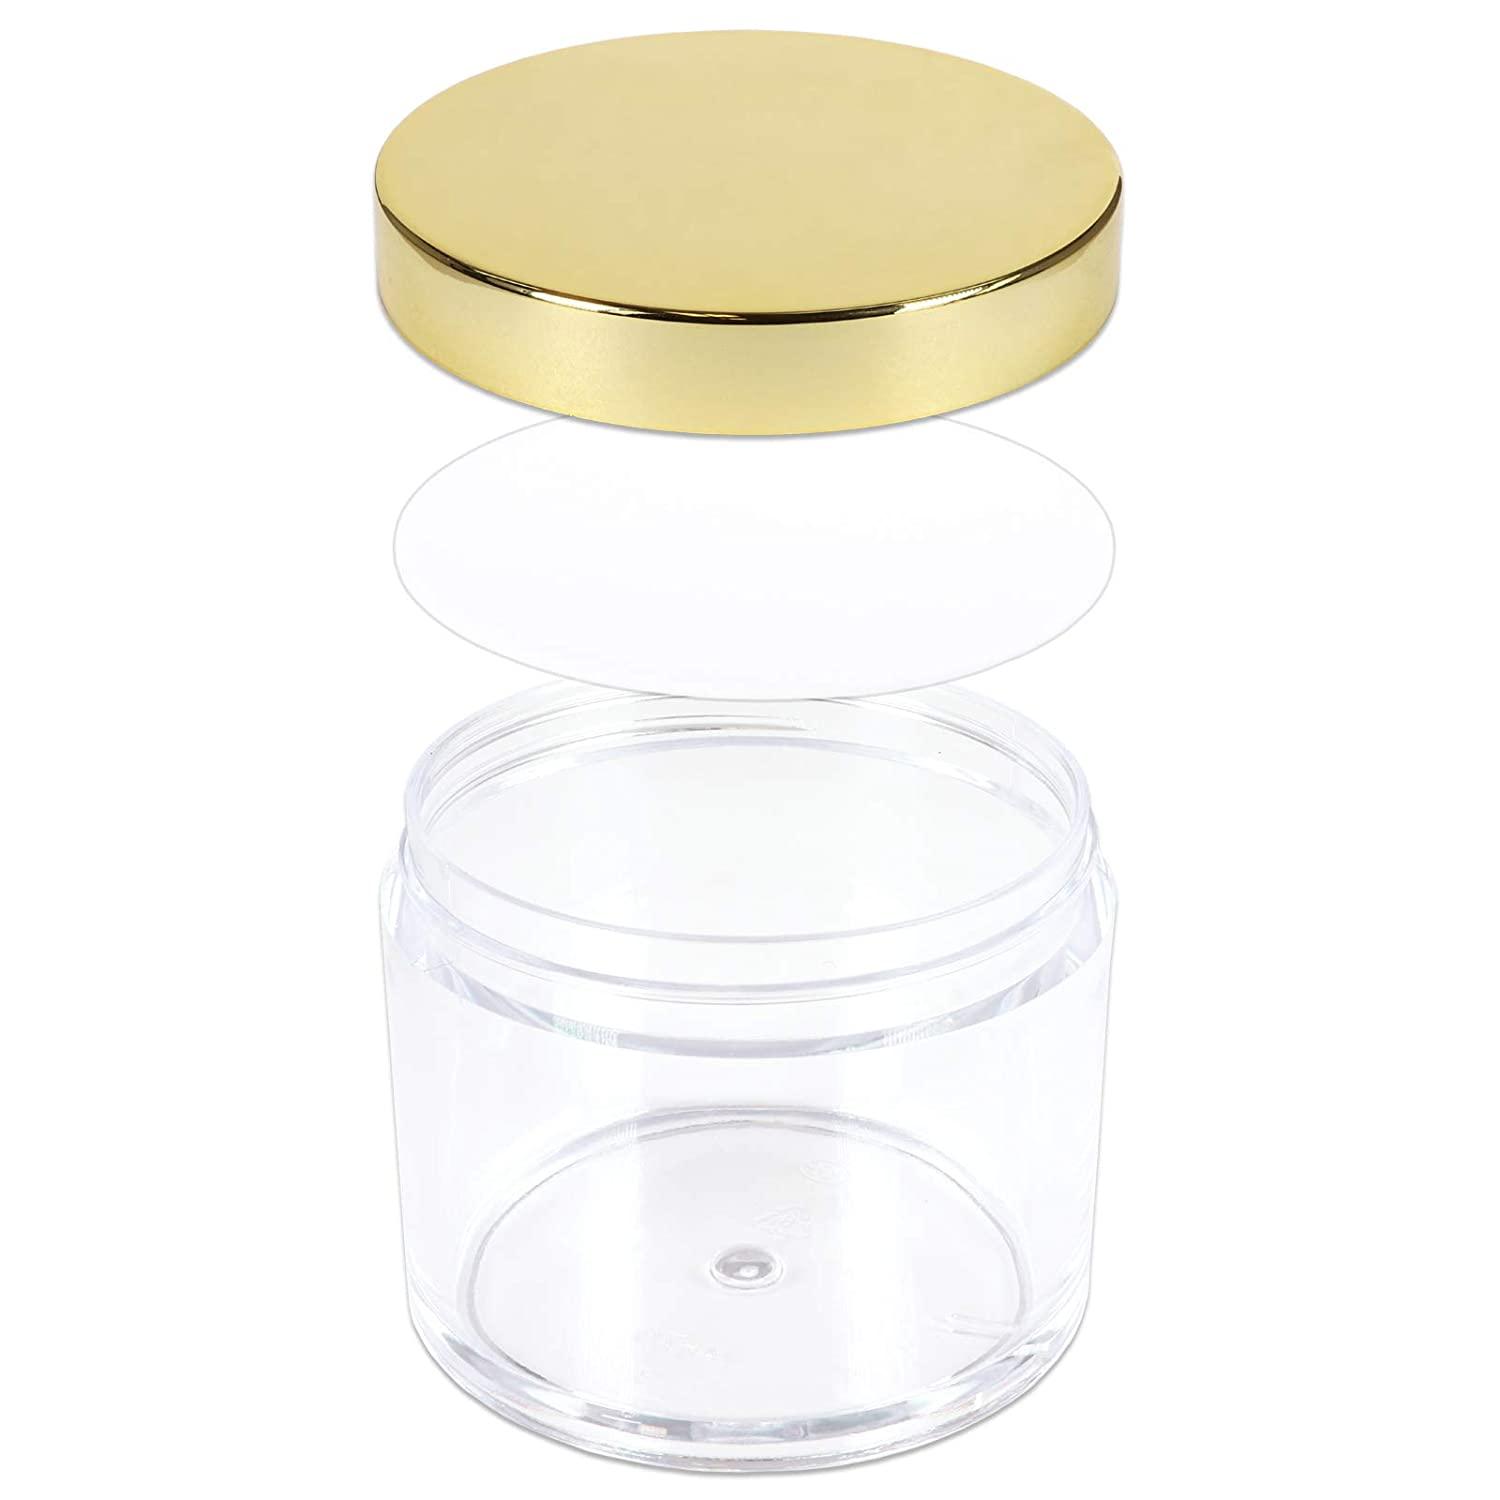 2oz Clear Glass Jar With Insulated Gold Lid for Creams, Skincare